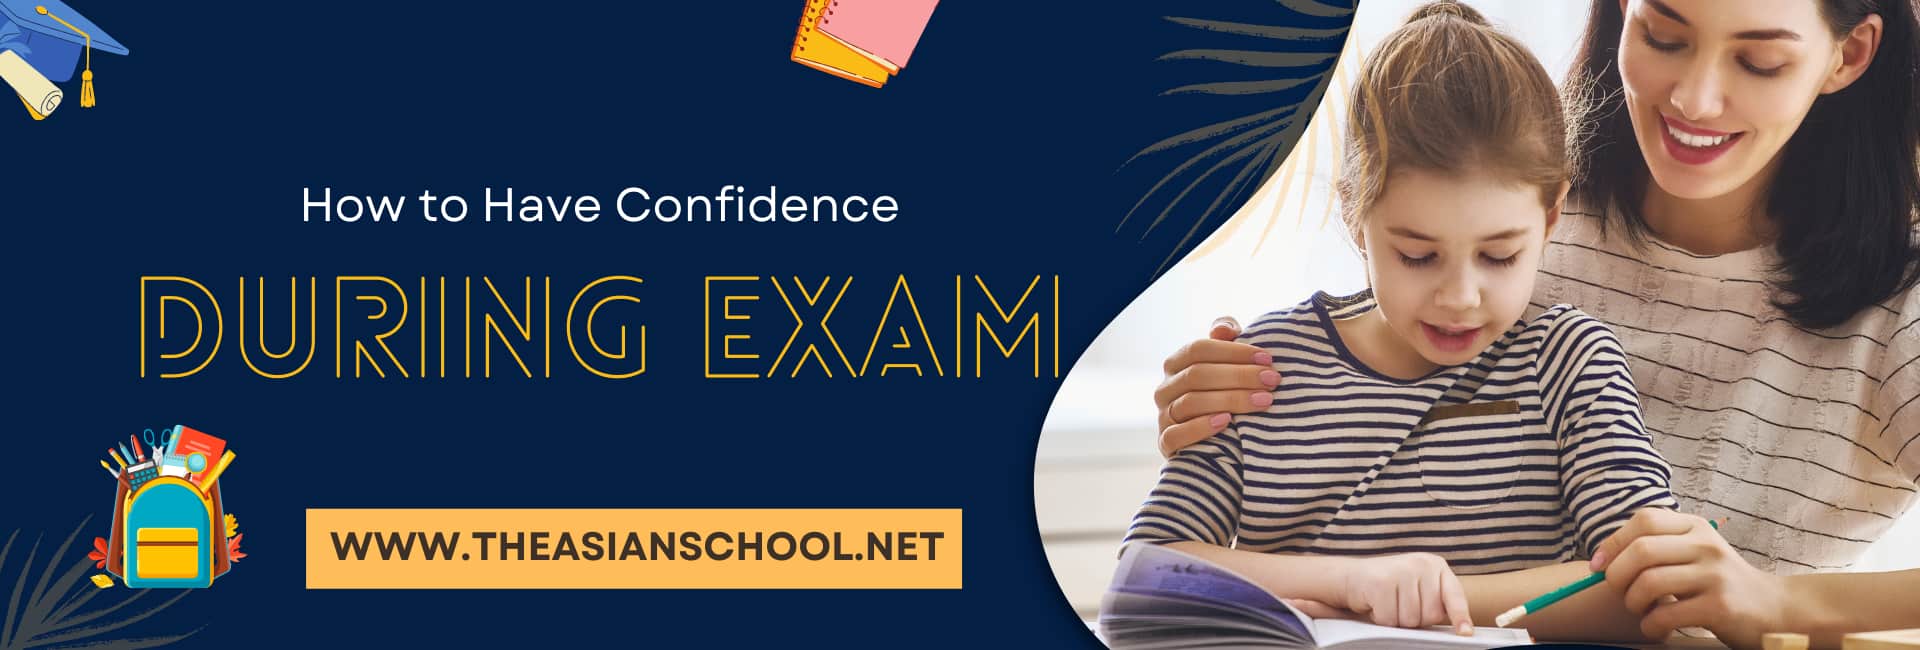 How To Have Confidence During Exam